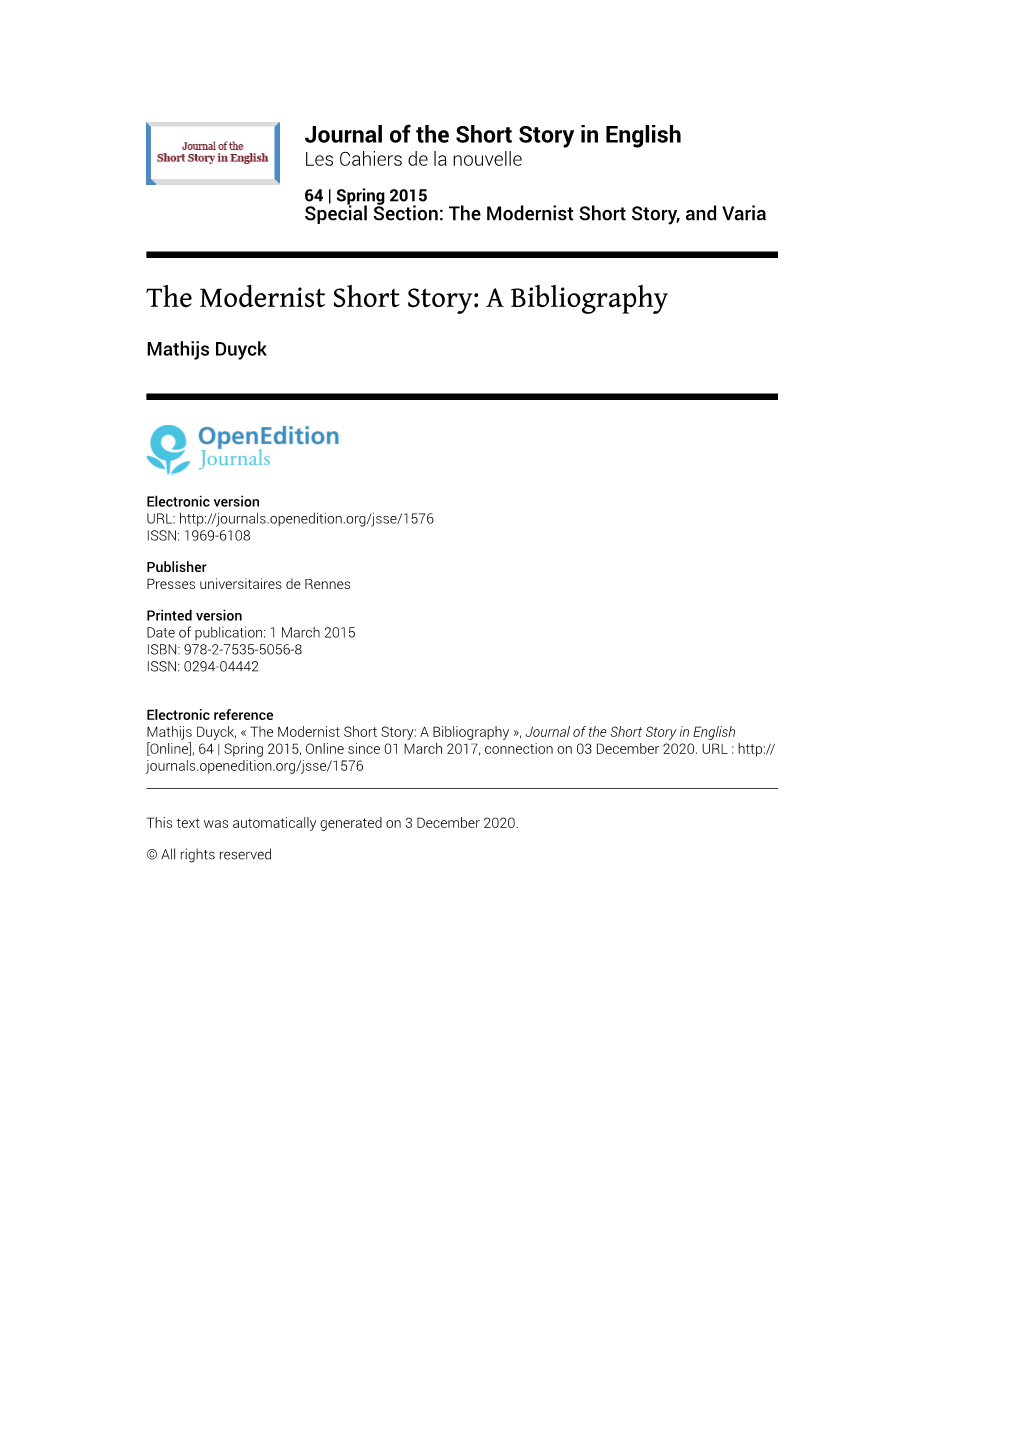 Journal of the Short Story in English, 64 | Spring 2015 the Modernist Short Story: a Bibliography 2